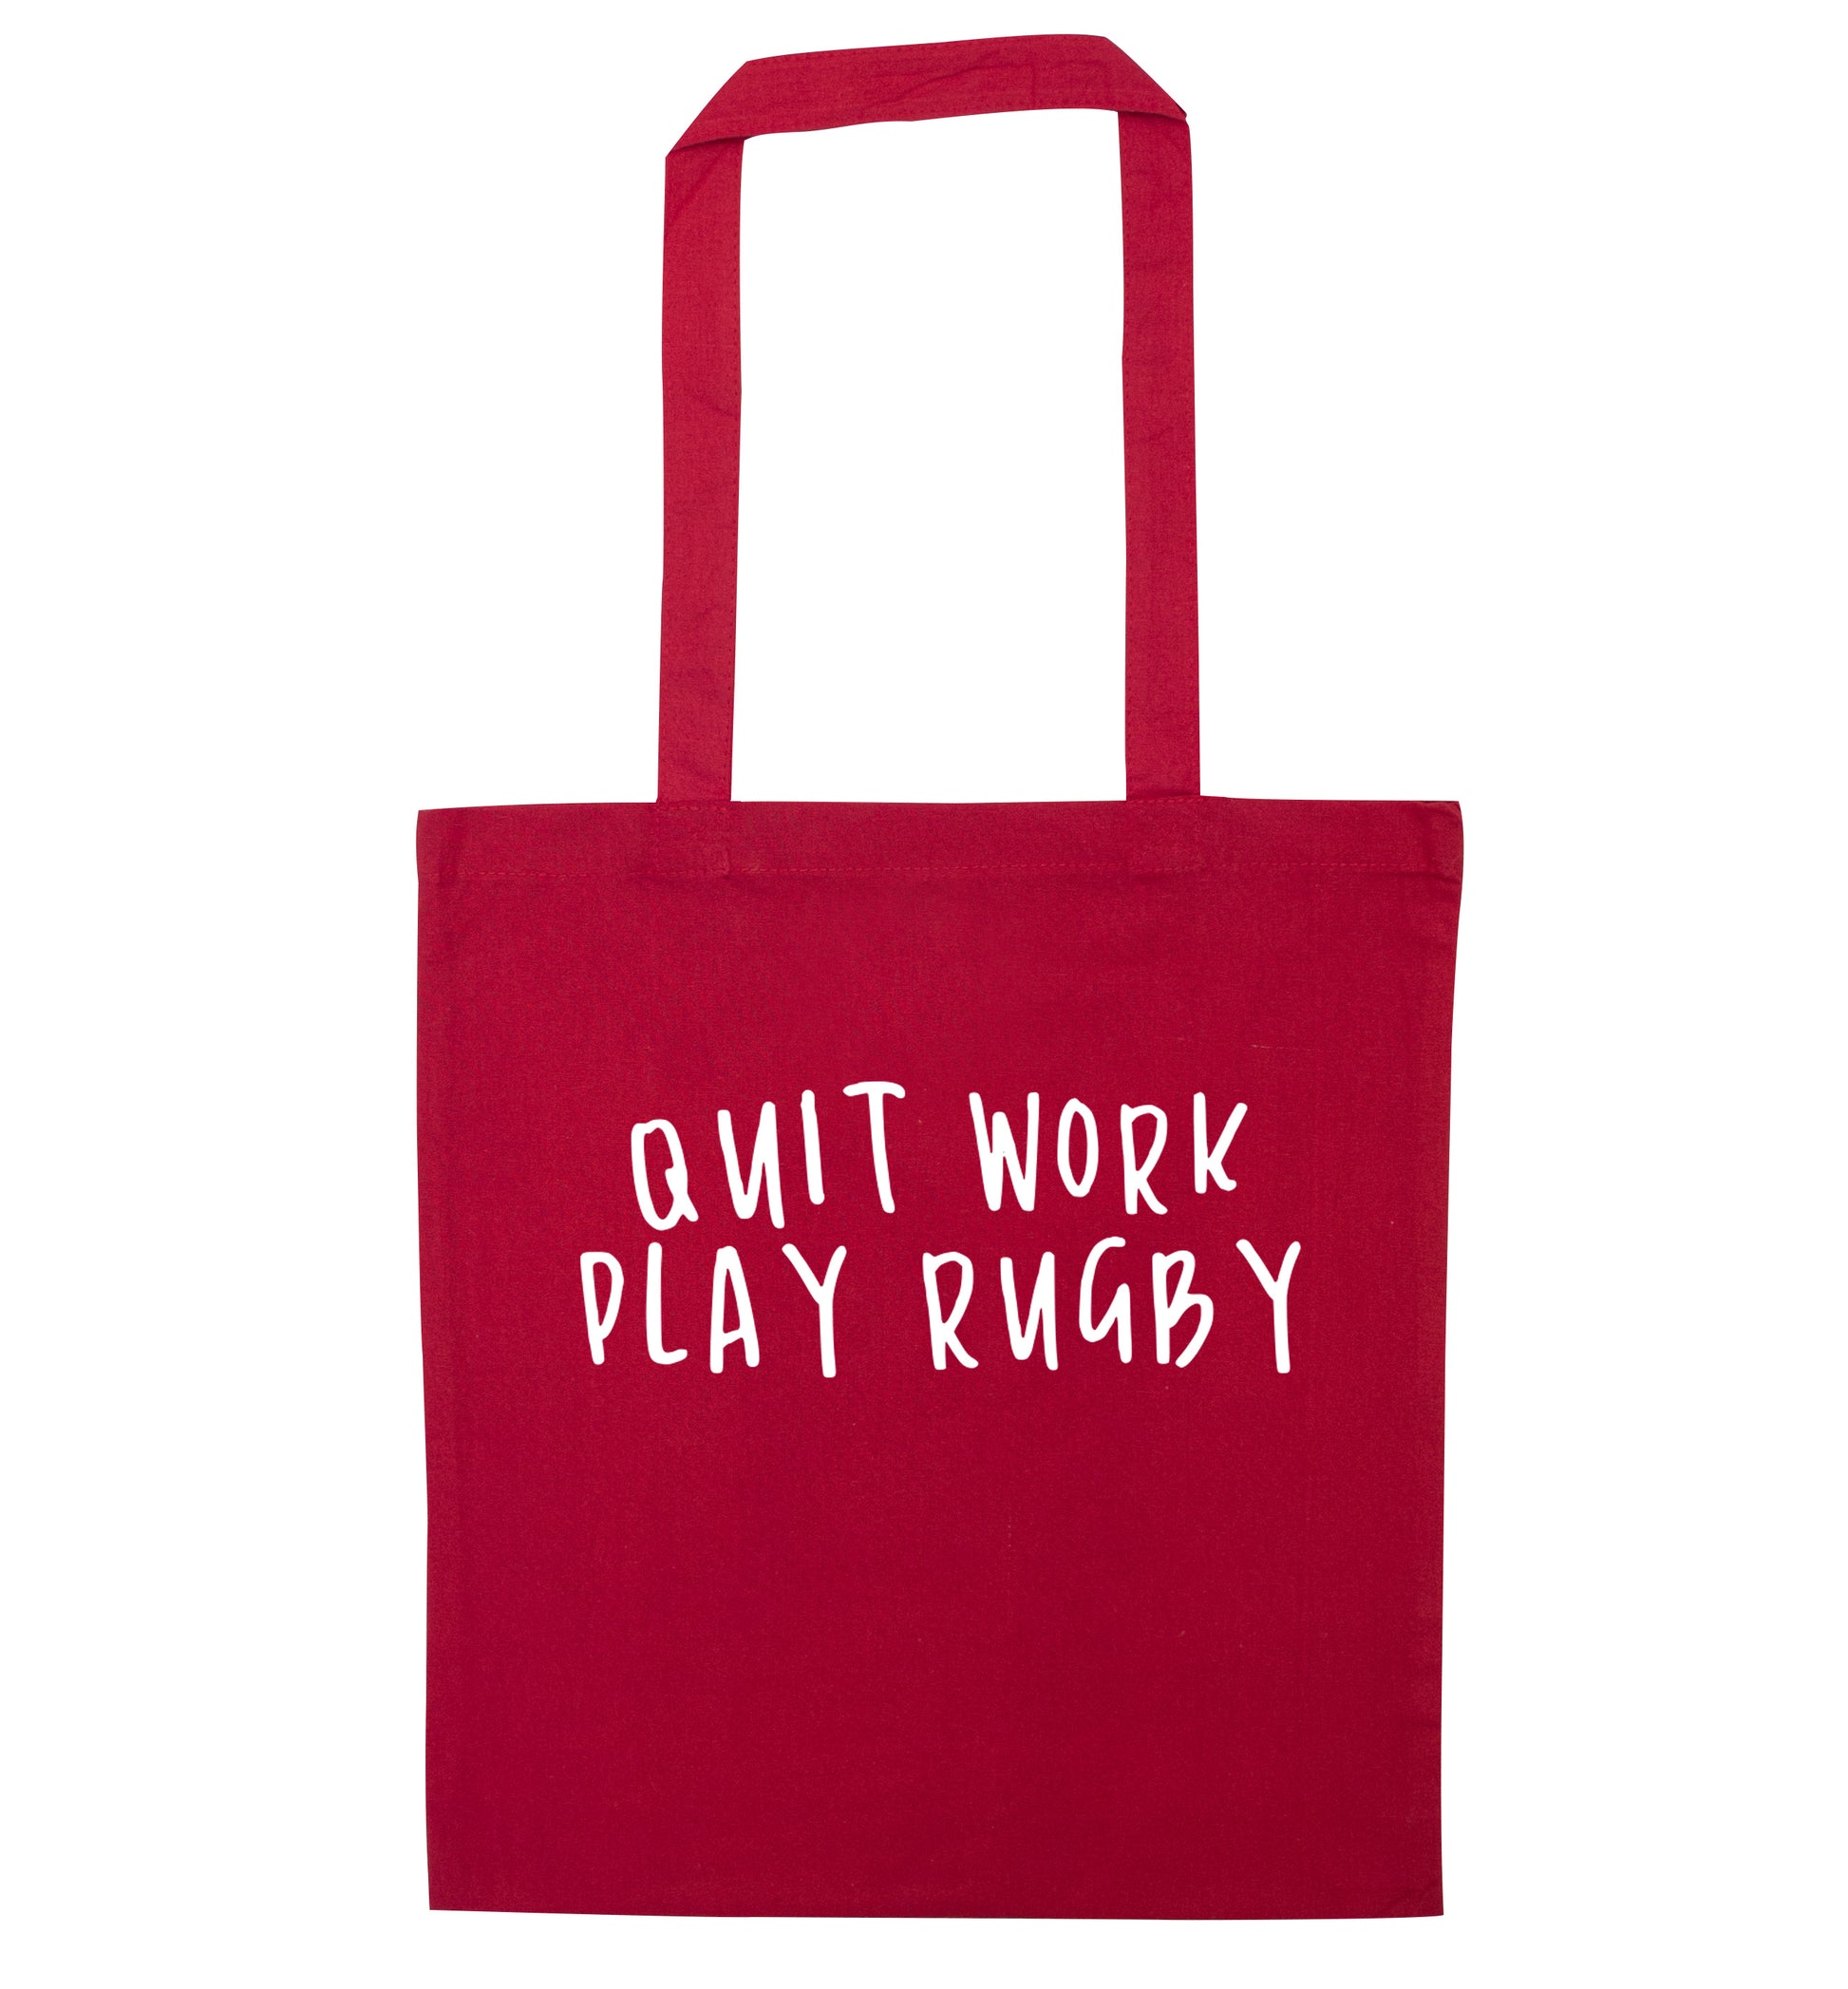 Quit work play rugby red tote bag